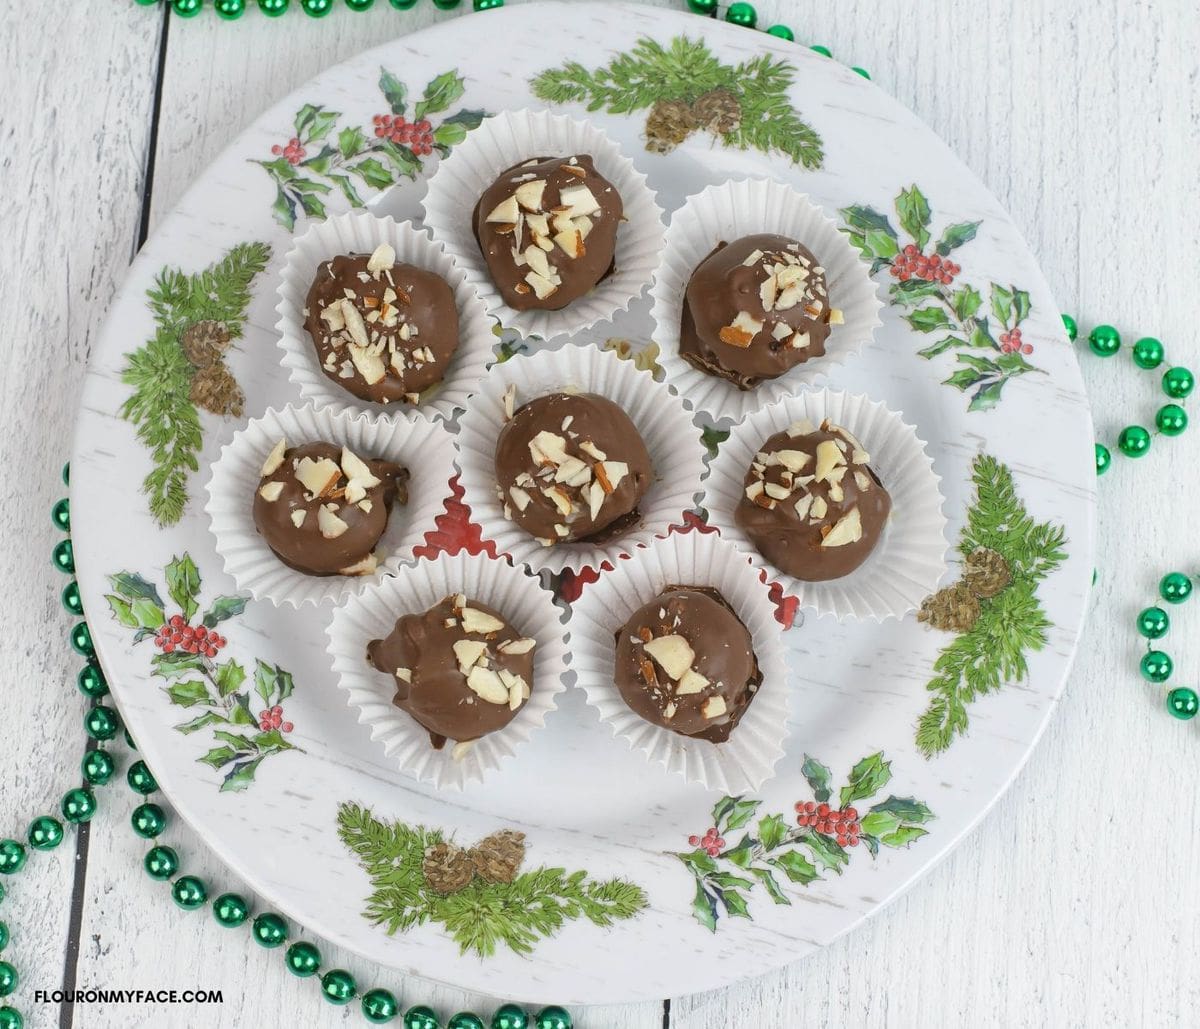 Homemade Christmas candy balls on a holiday serving plate.